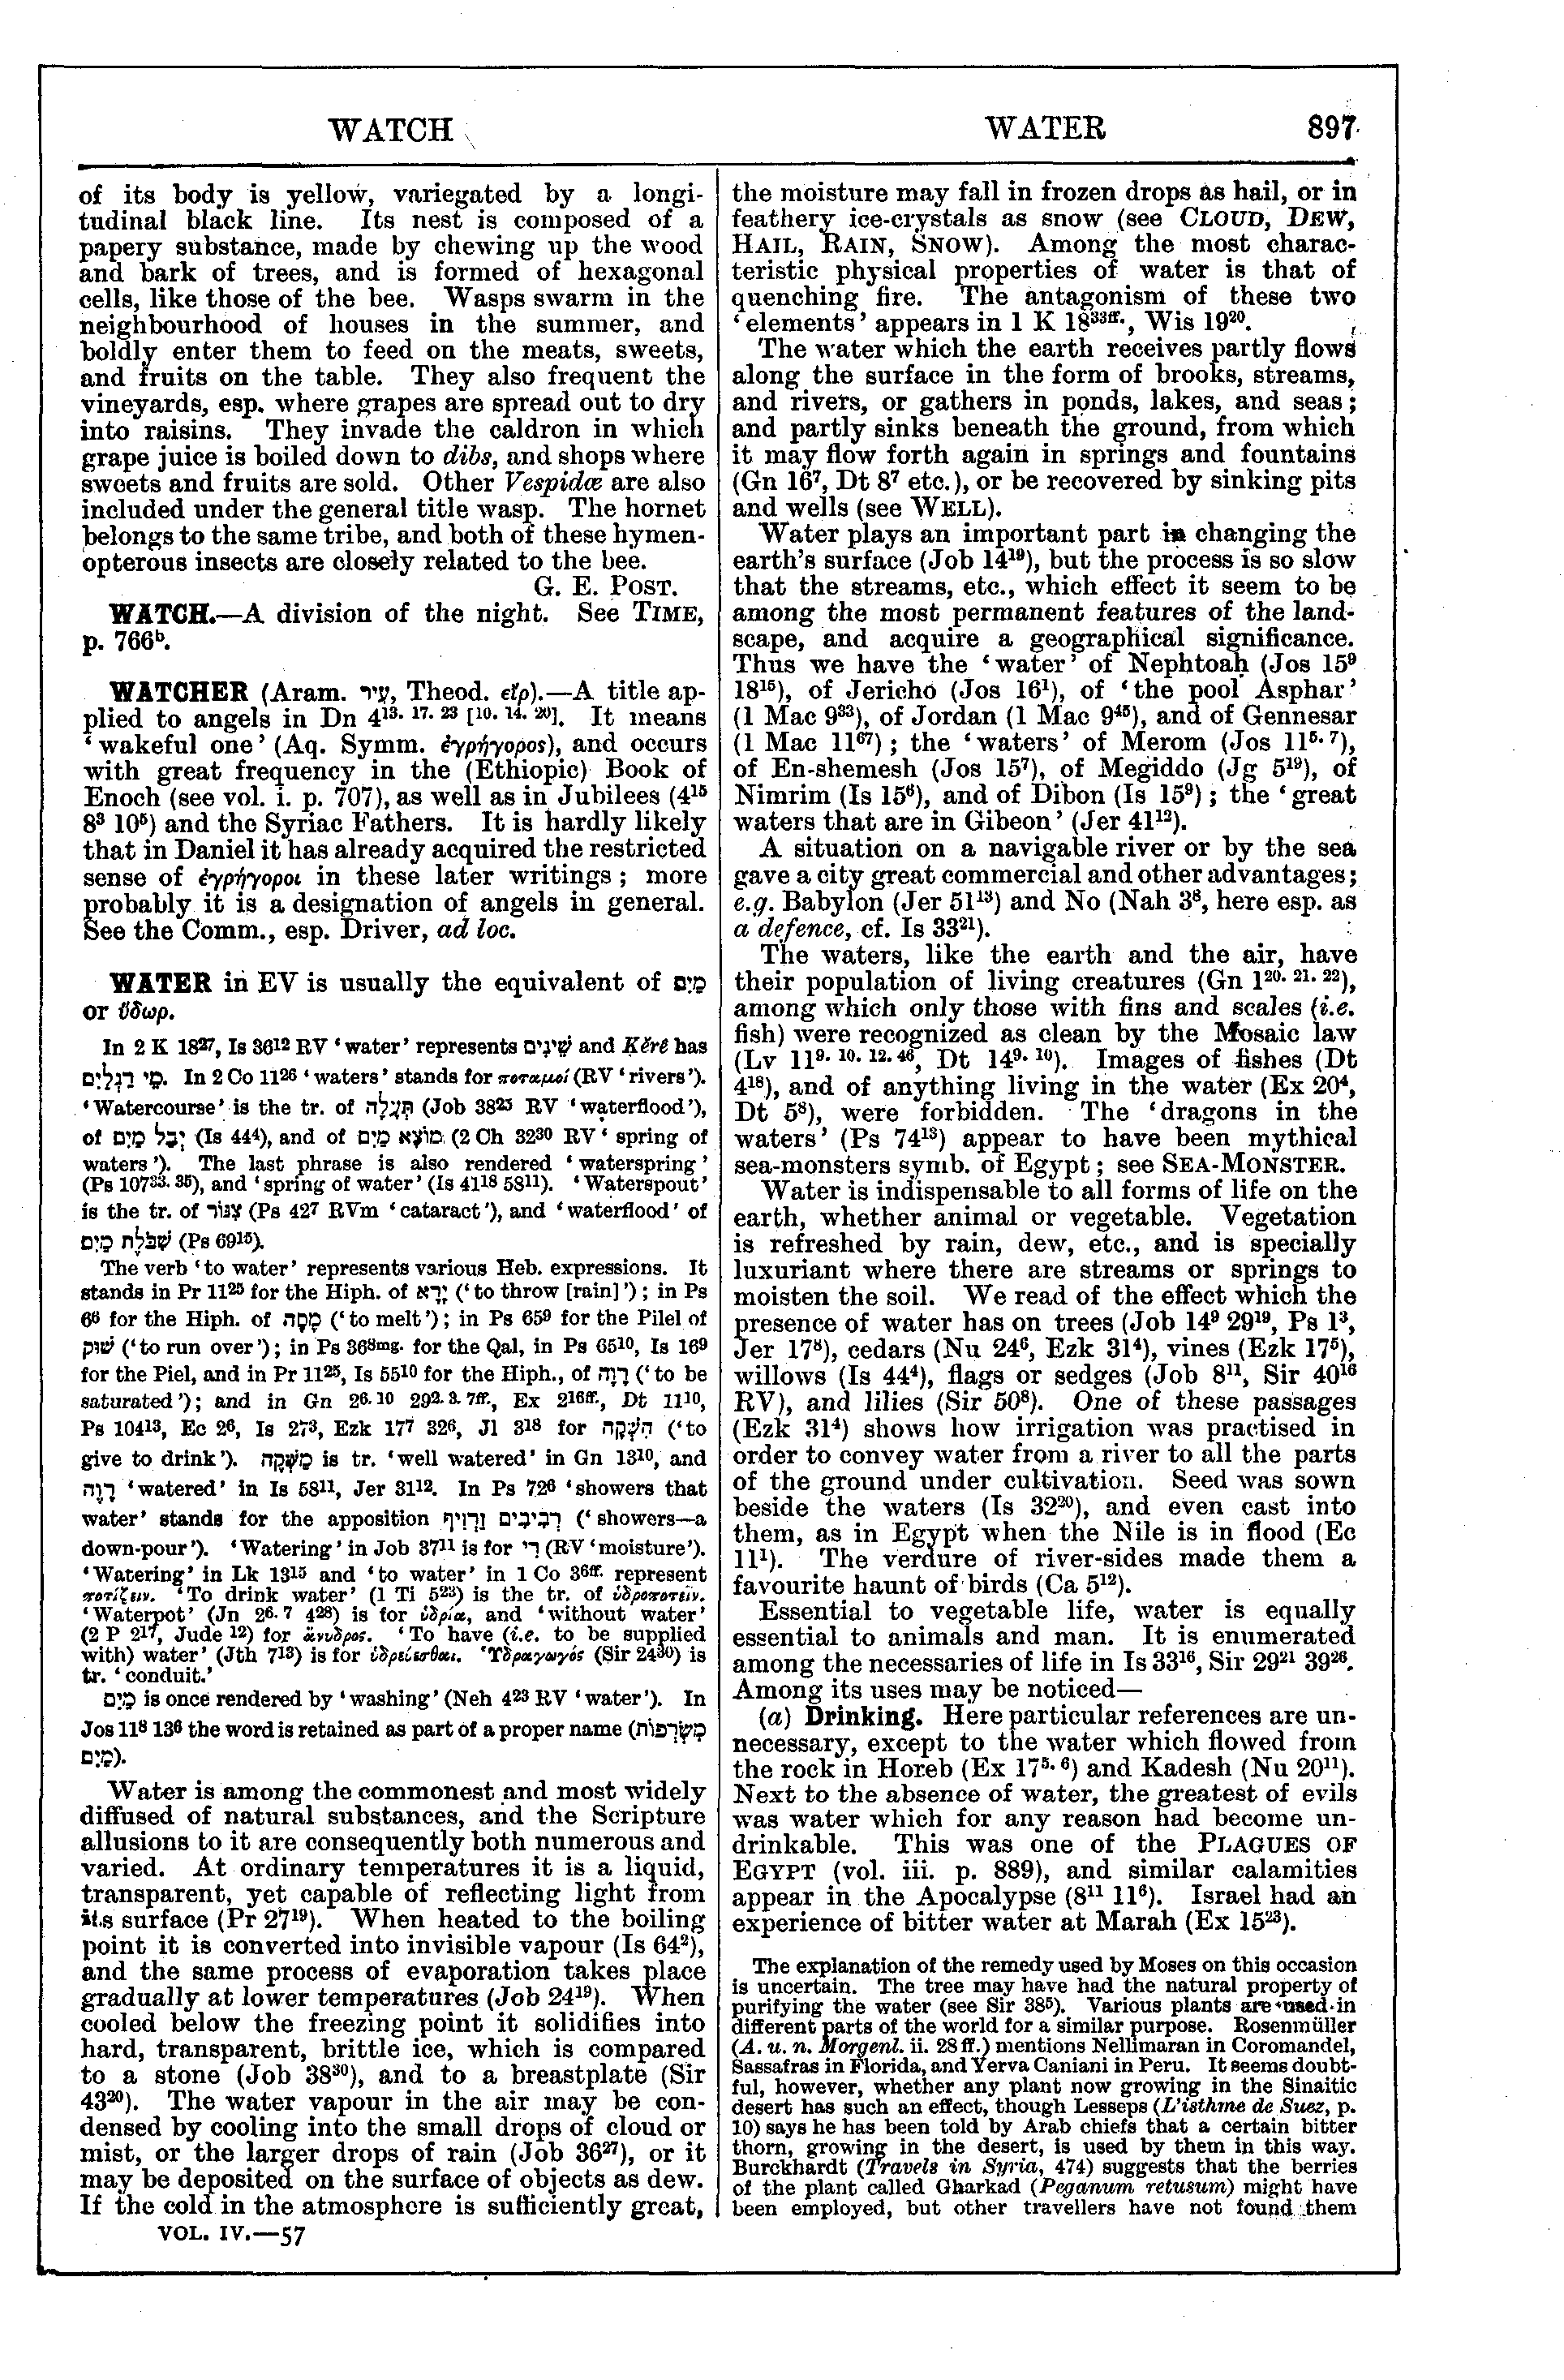 Image of page 897